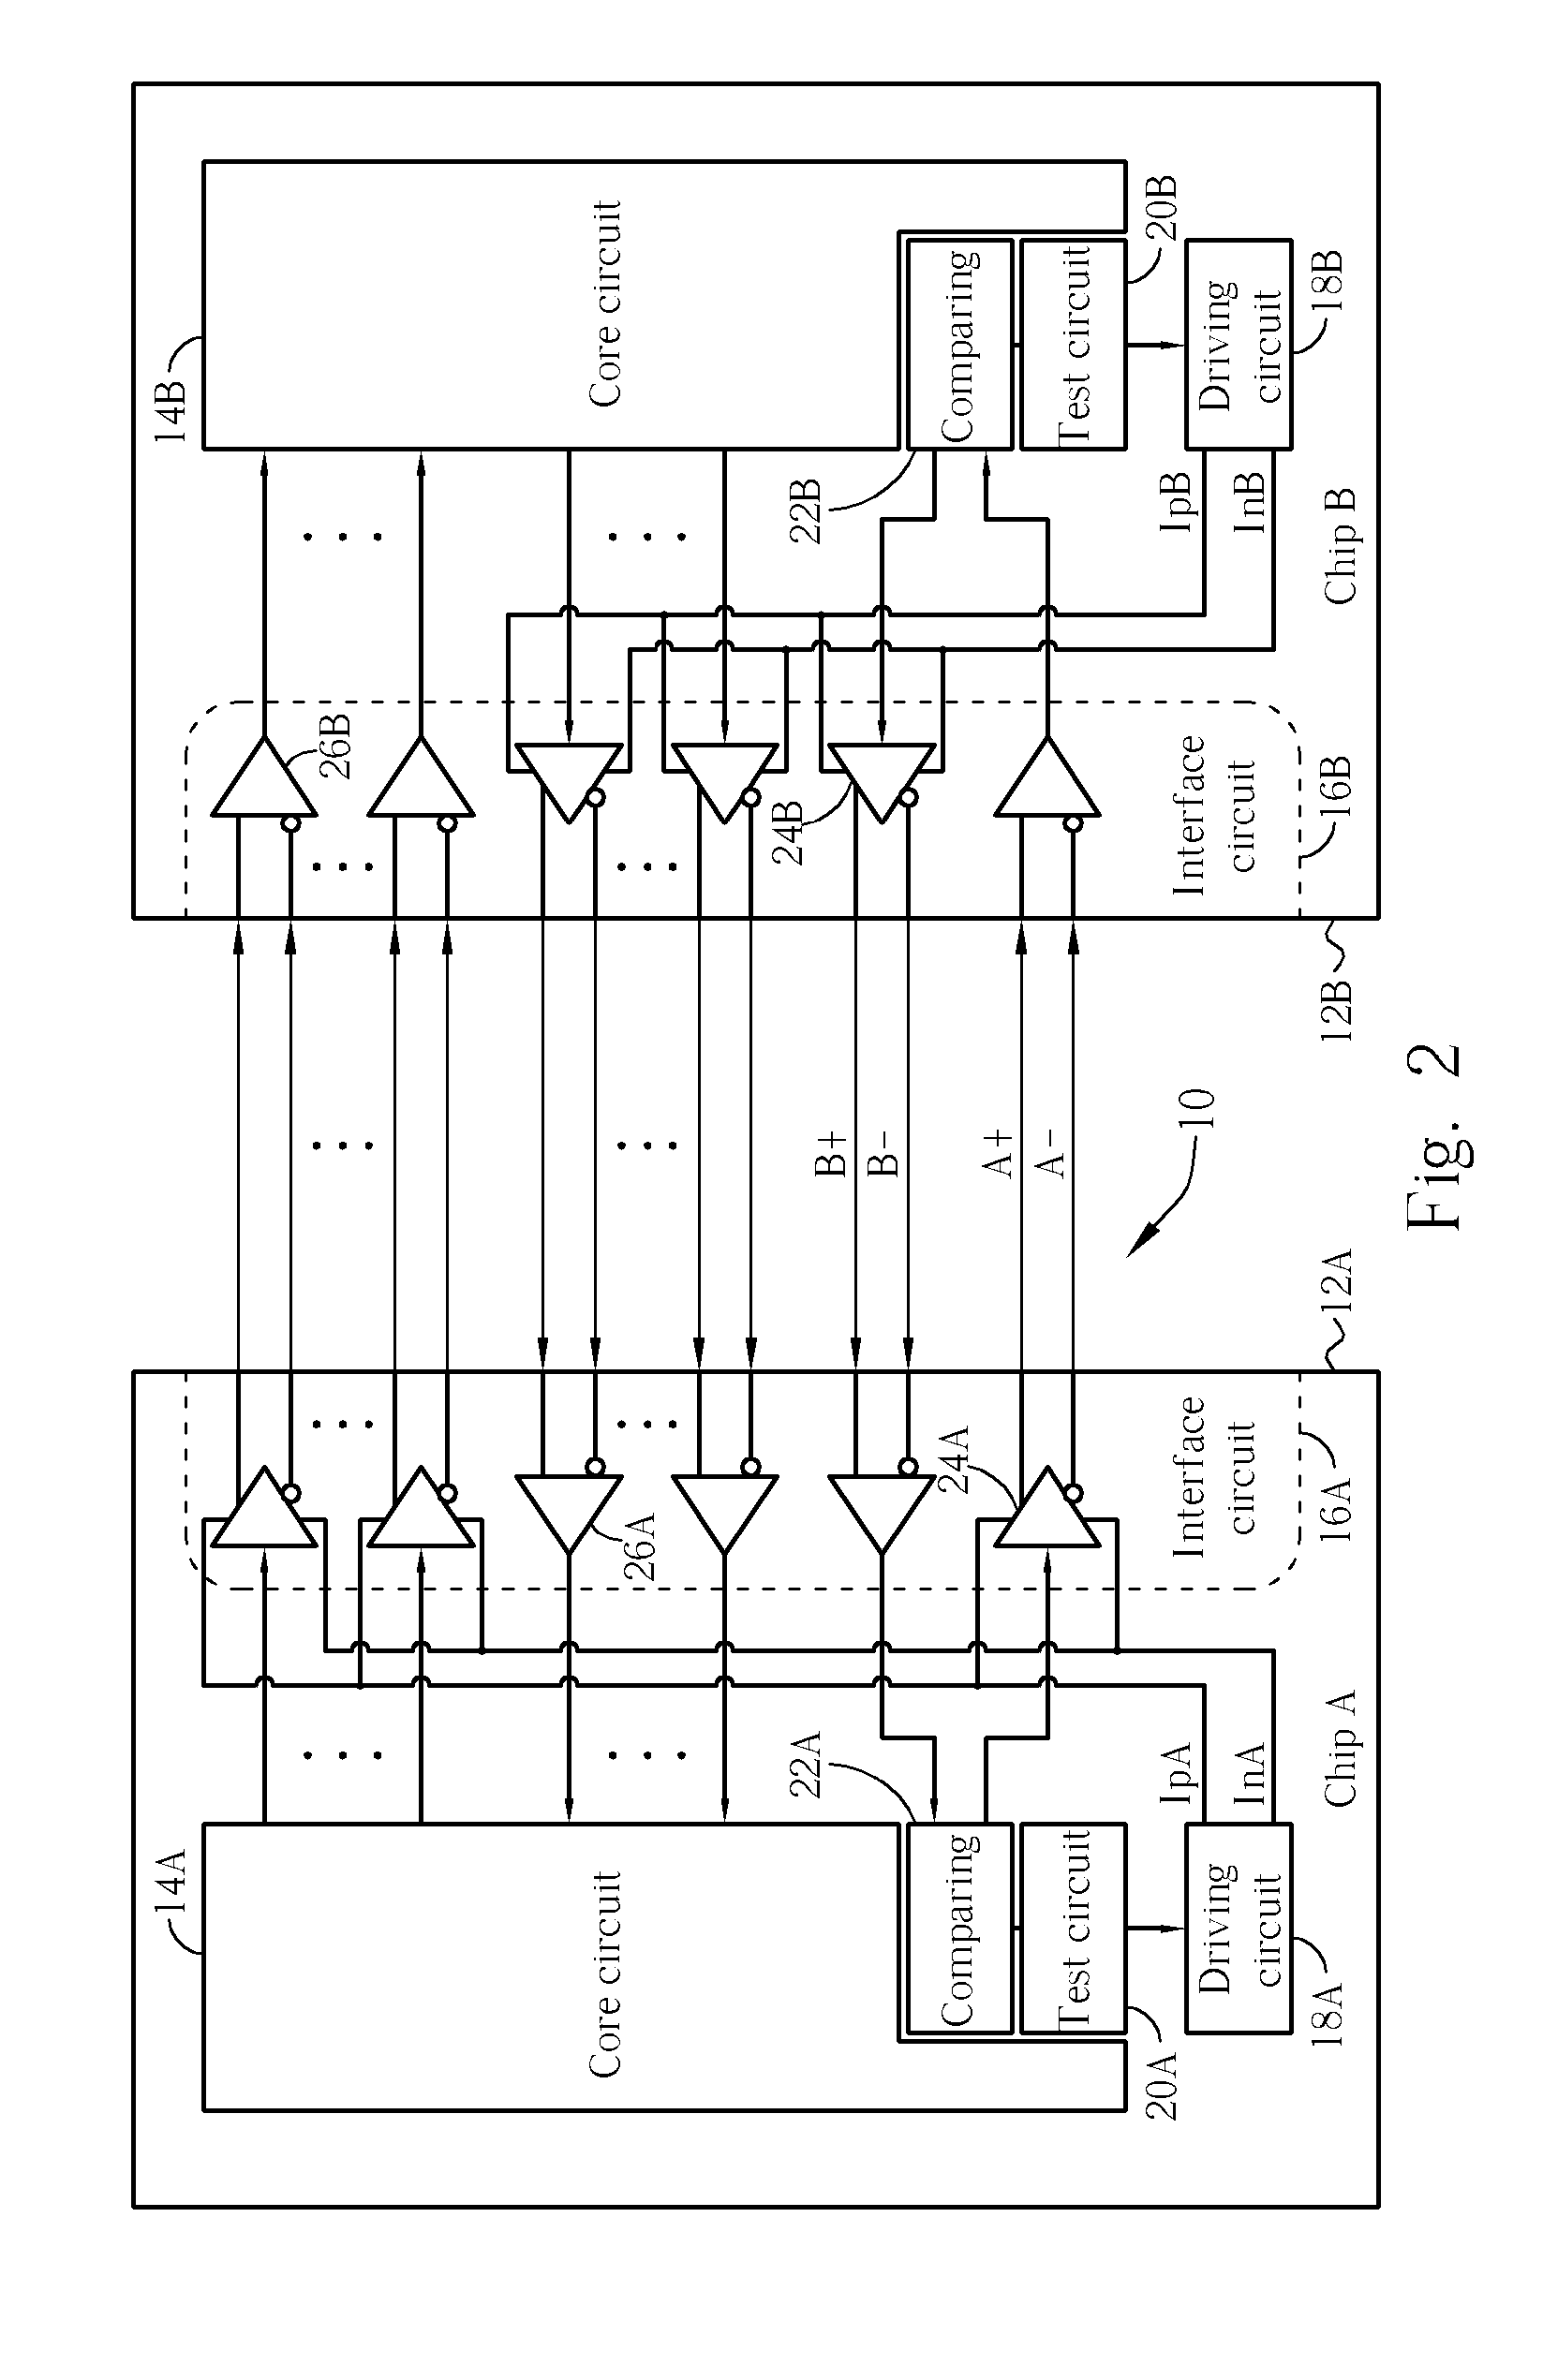 Method and related apparatus for calibrating signal driving parameters between chips